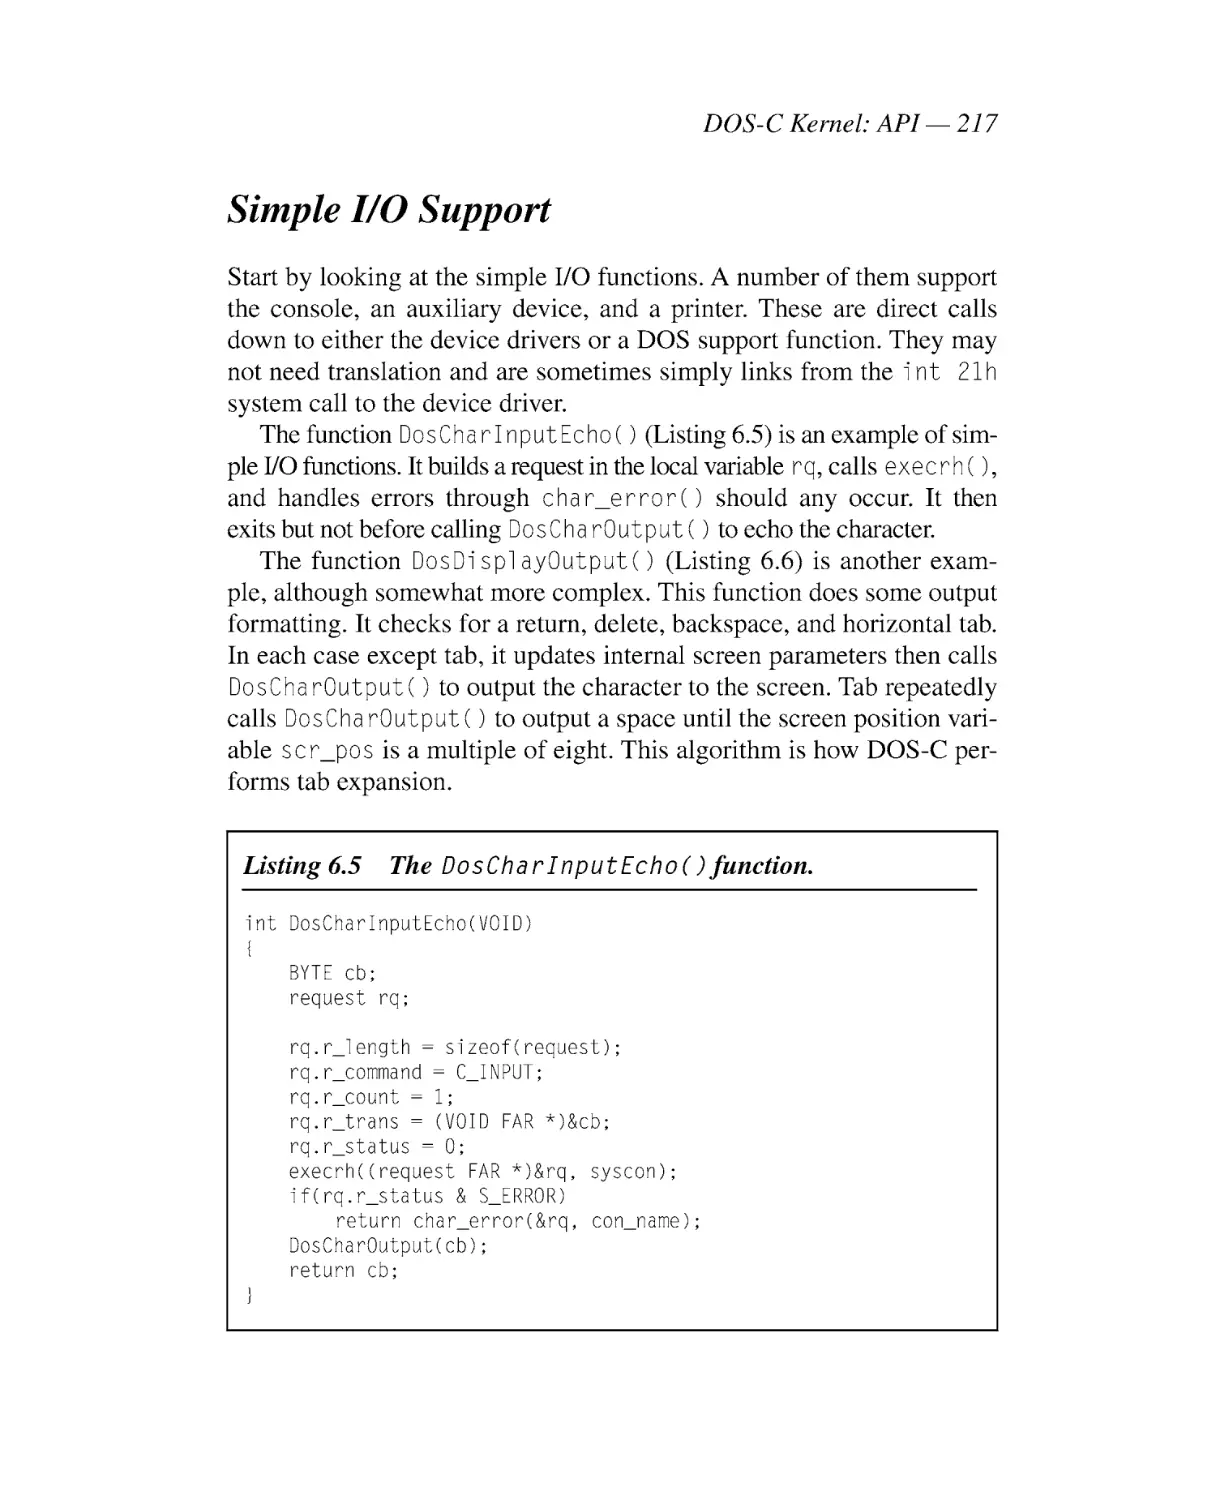 Simple I/O Support